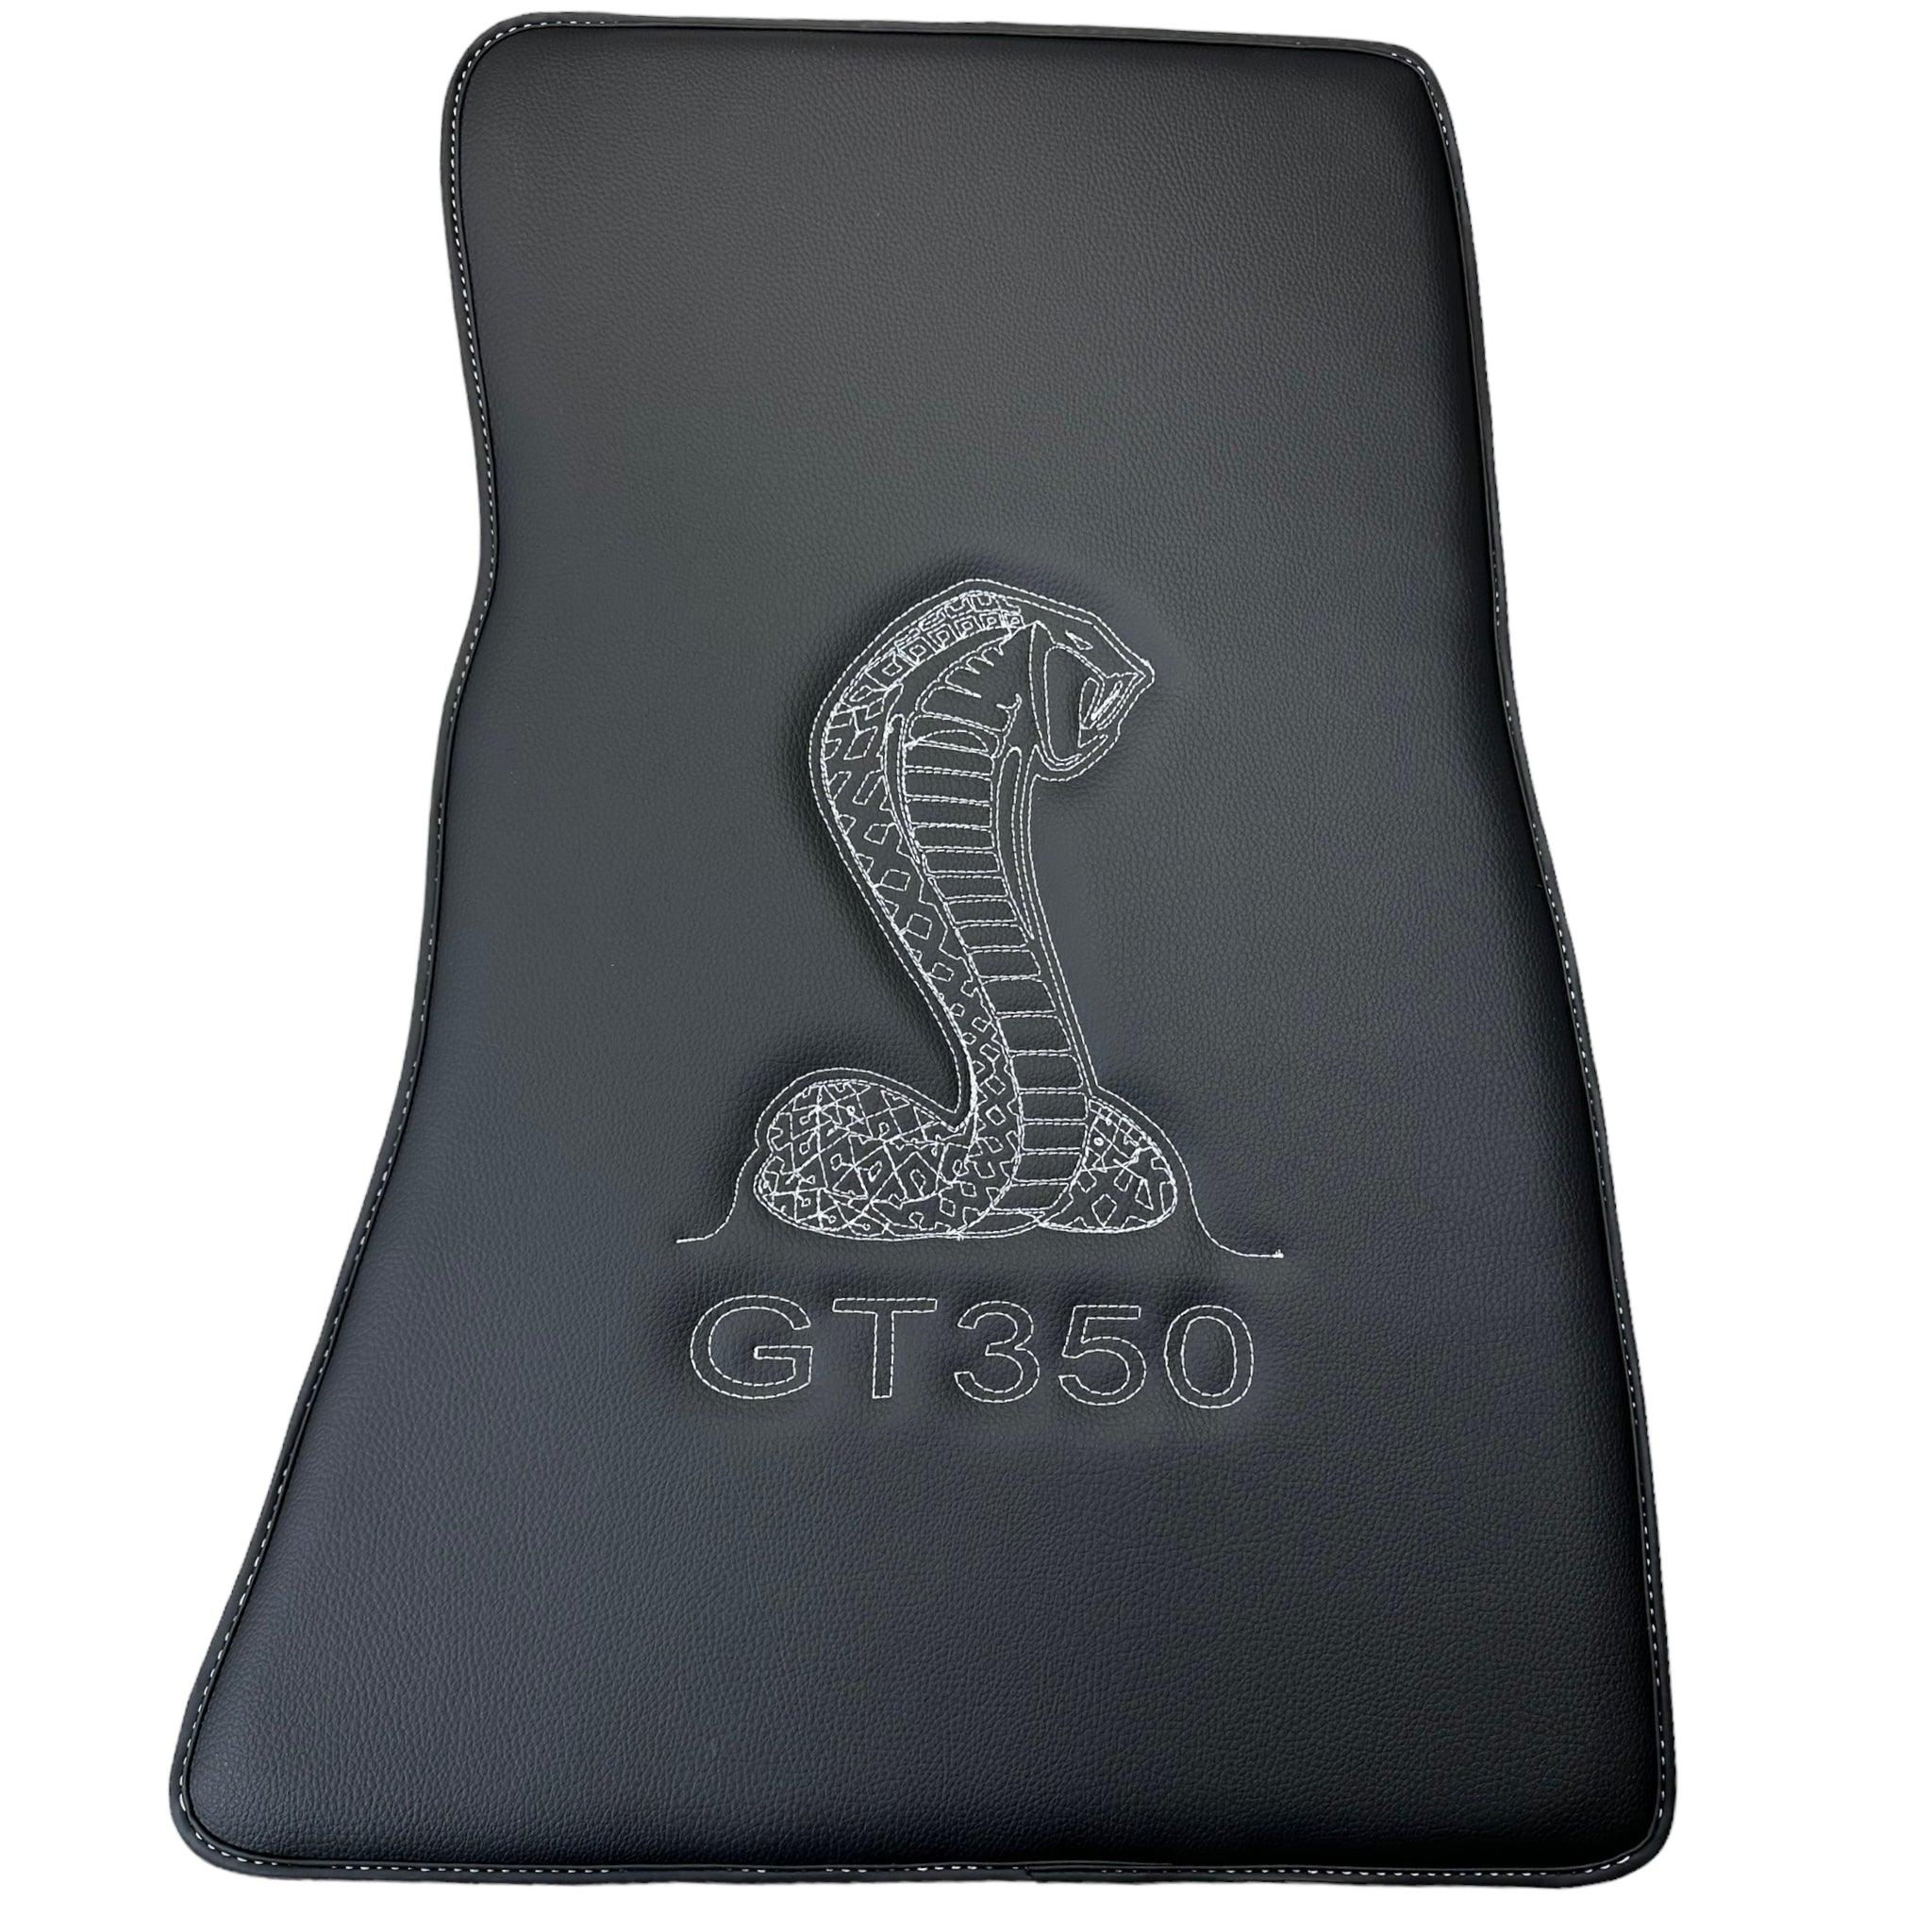 Leather Floor Mats for Ford Mustang GT350 Shelby (2015-2021) with Cobra Sewing